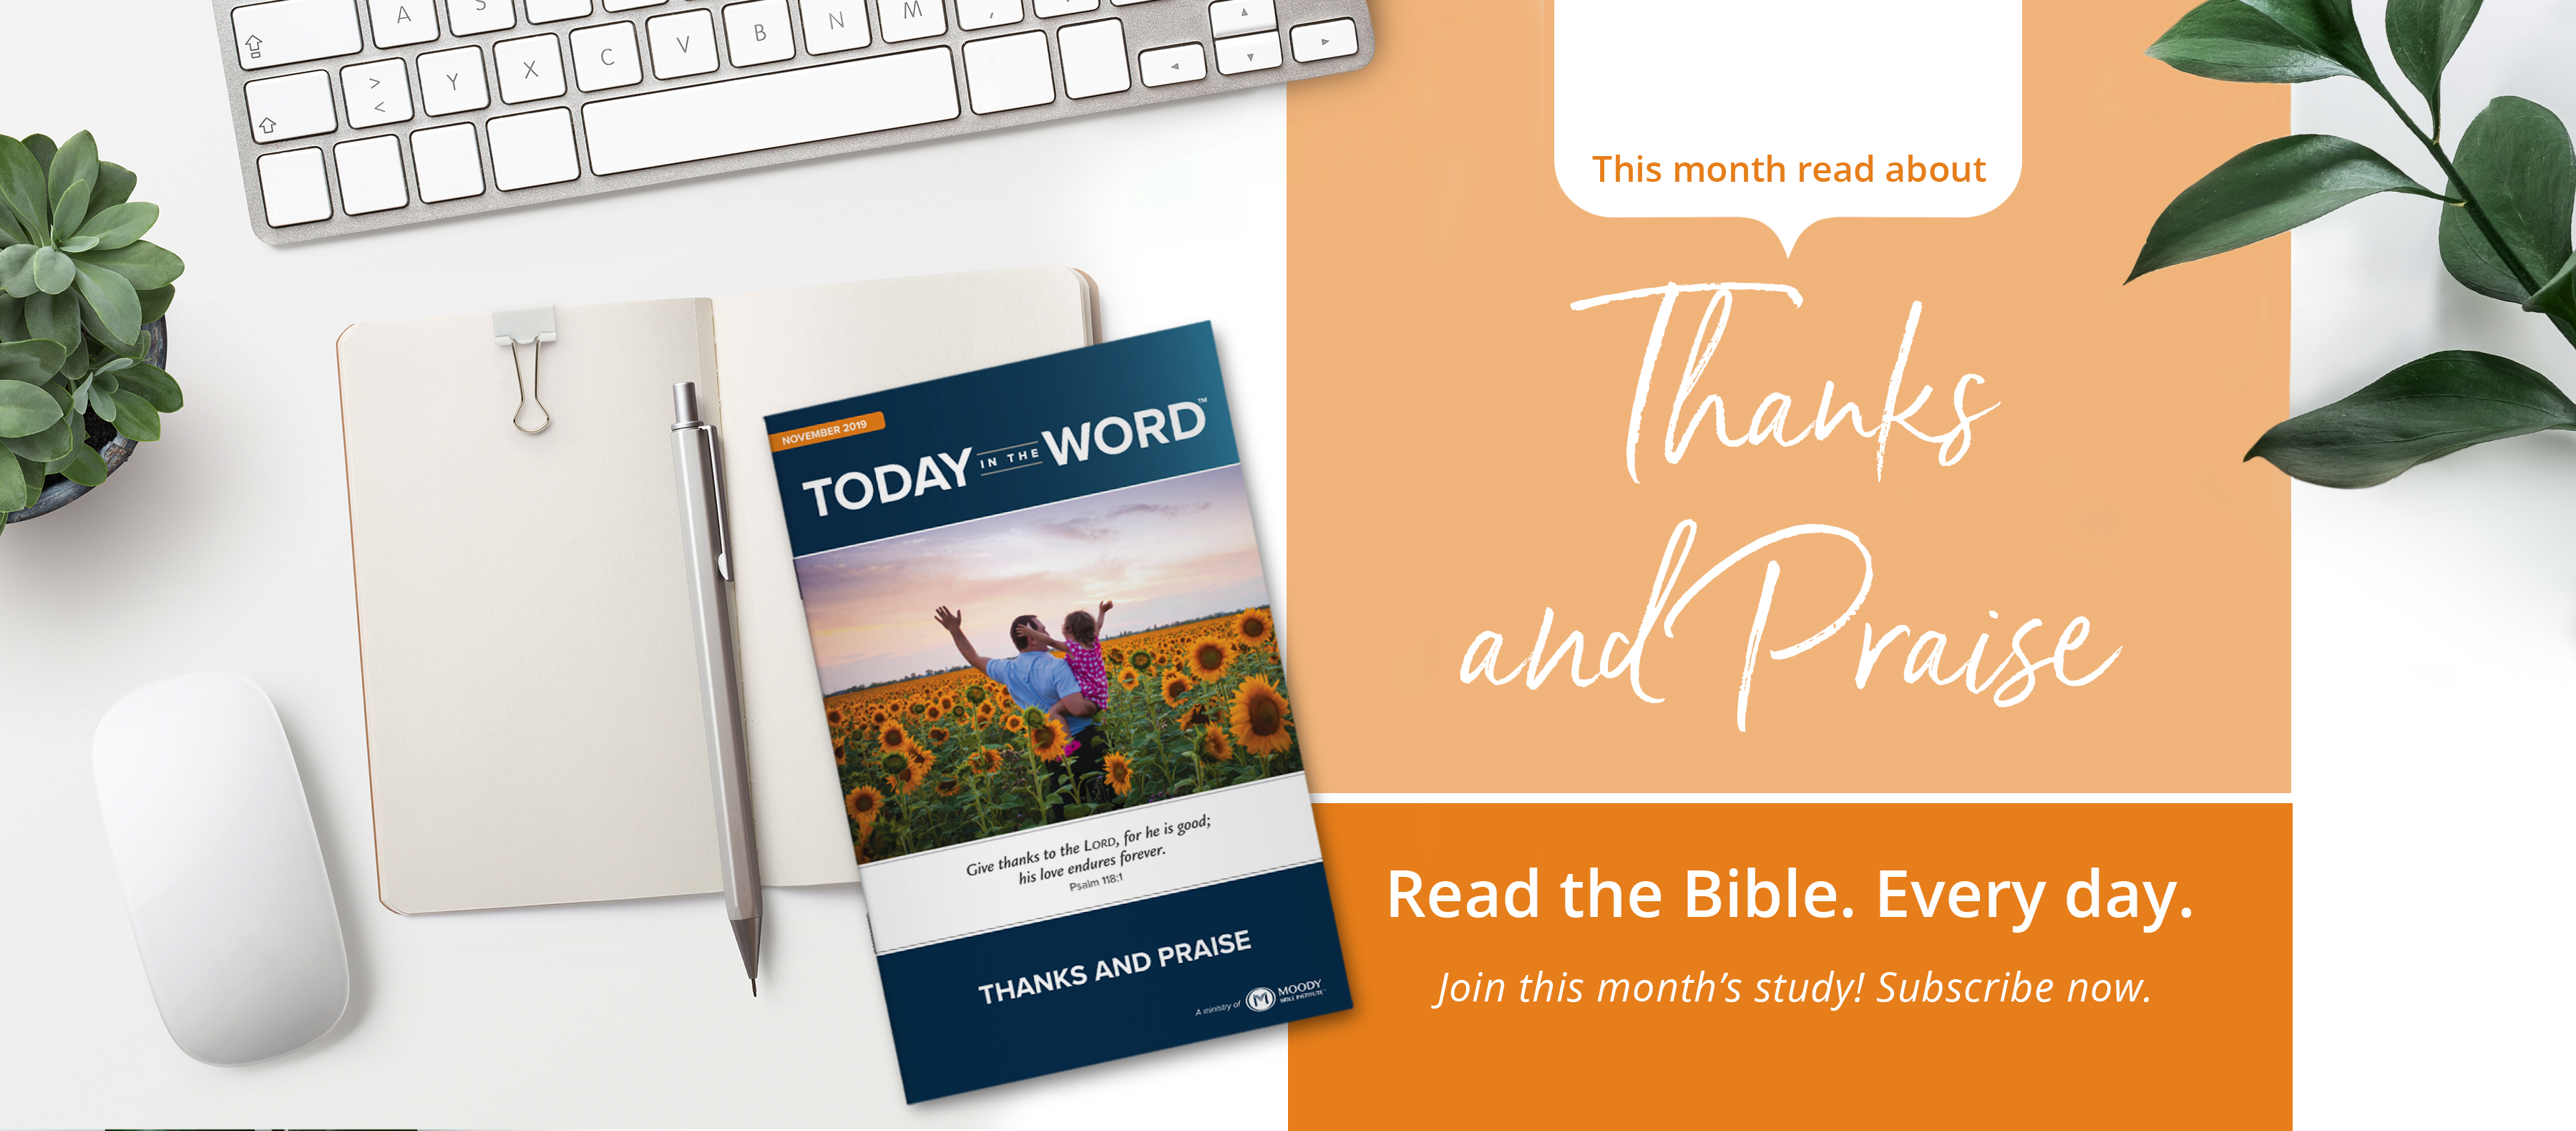 Daily Devotional | Give Thanks for Ministers of the Word